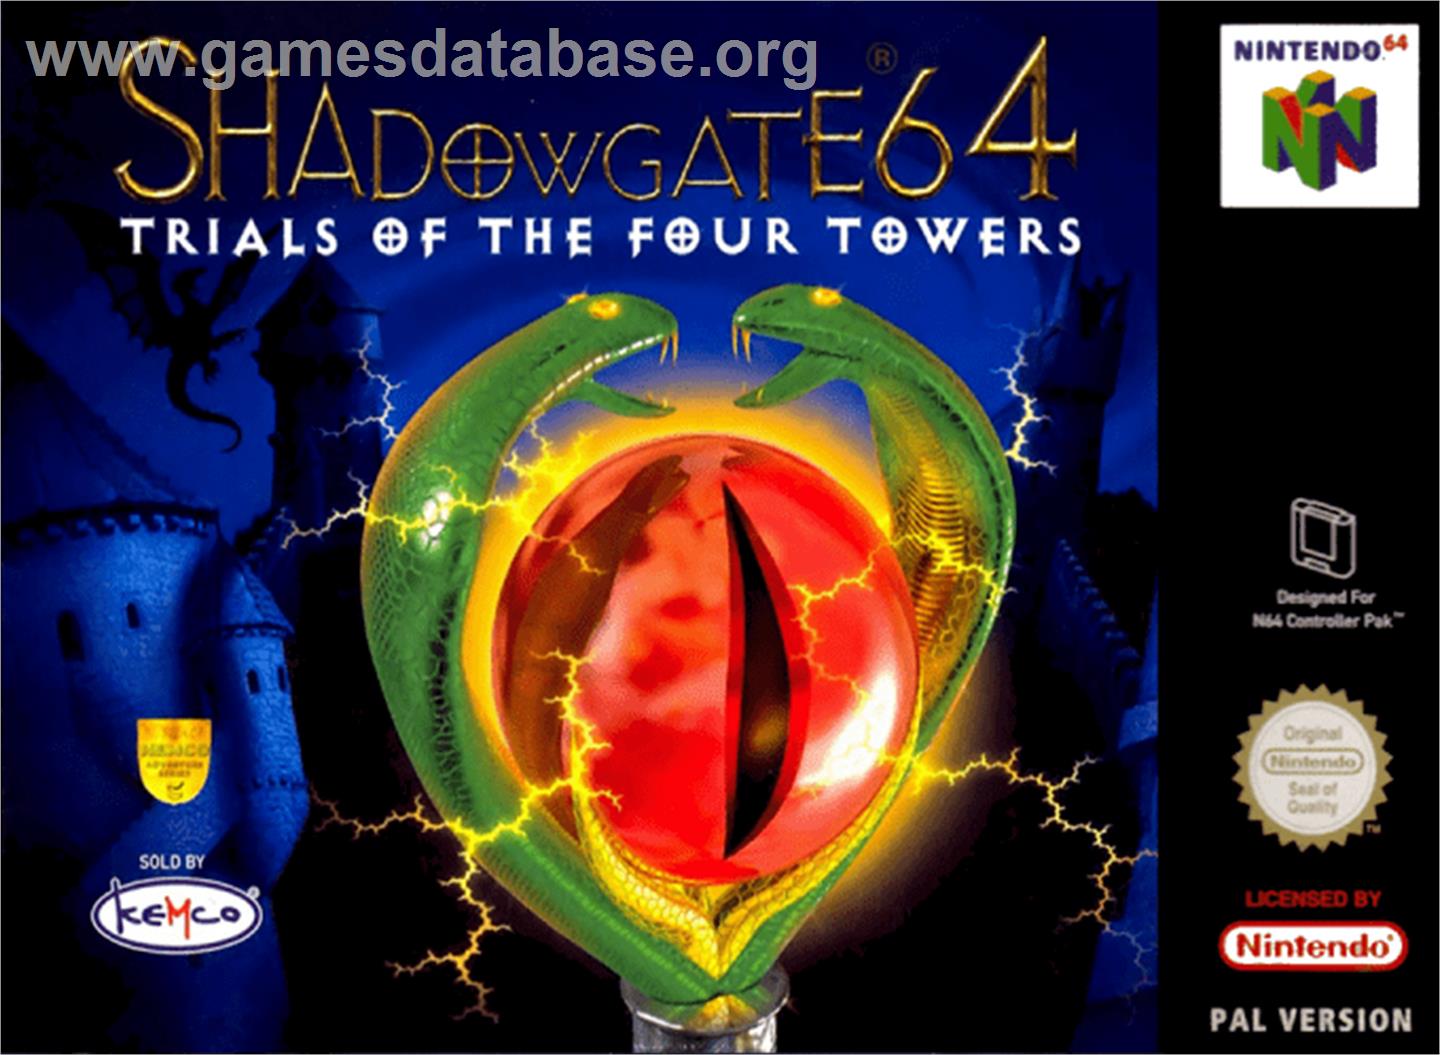 Shadowgate 64: The Trials of the Four Towers - Nintendo N64 - Artwork - Box